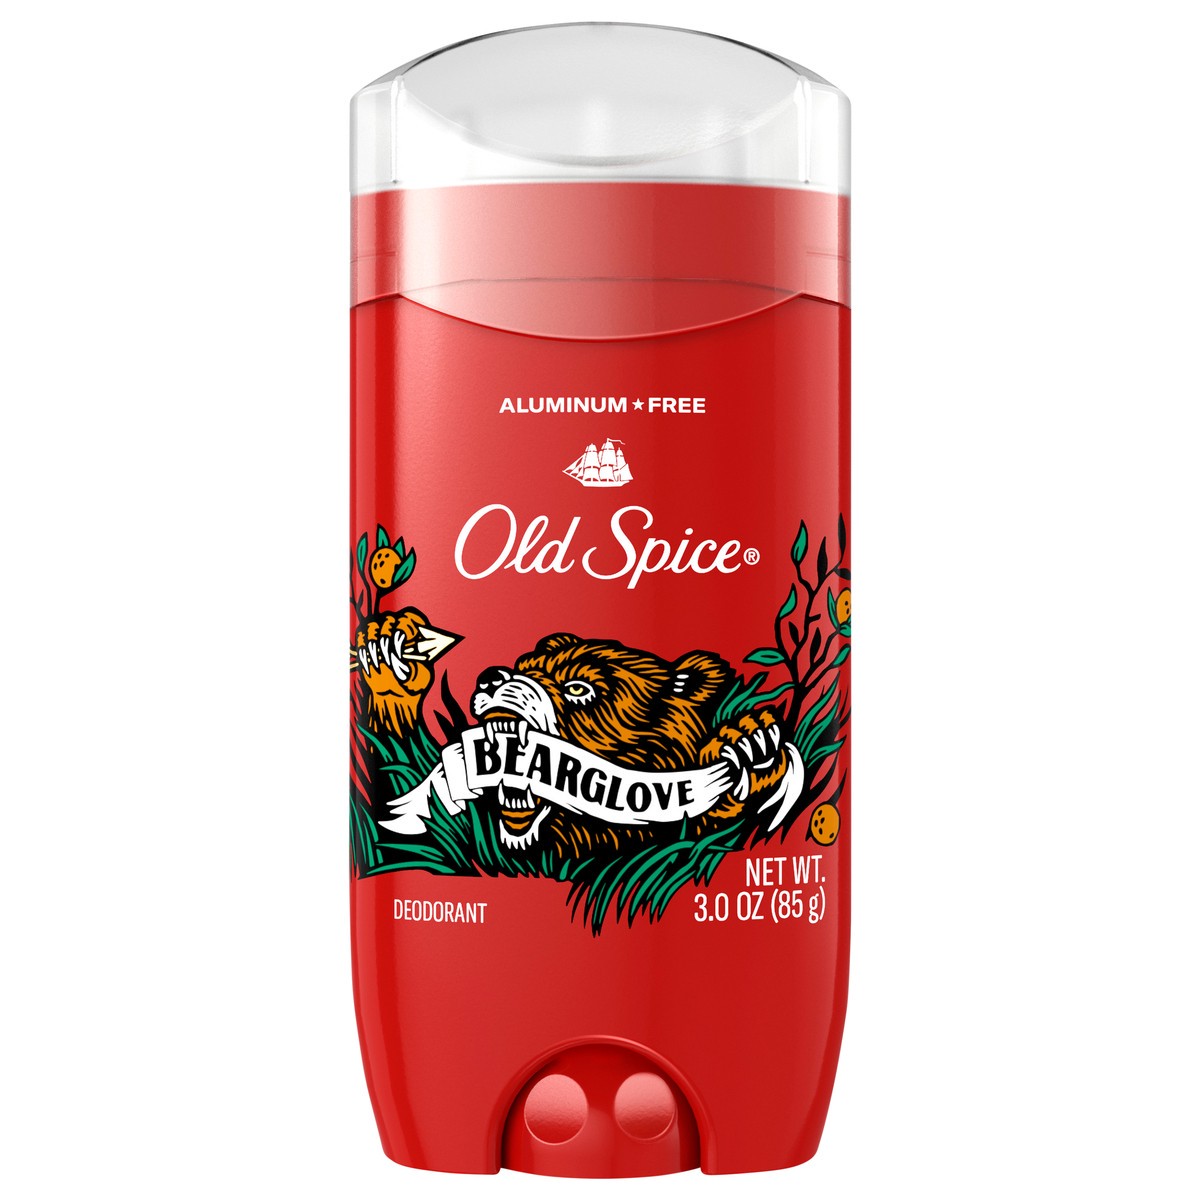 slide 1 of 3, Old Spice Wild Collection Bearglove Deodorant - 3oz, 3 oz